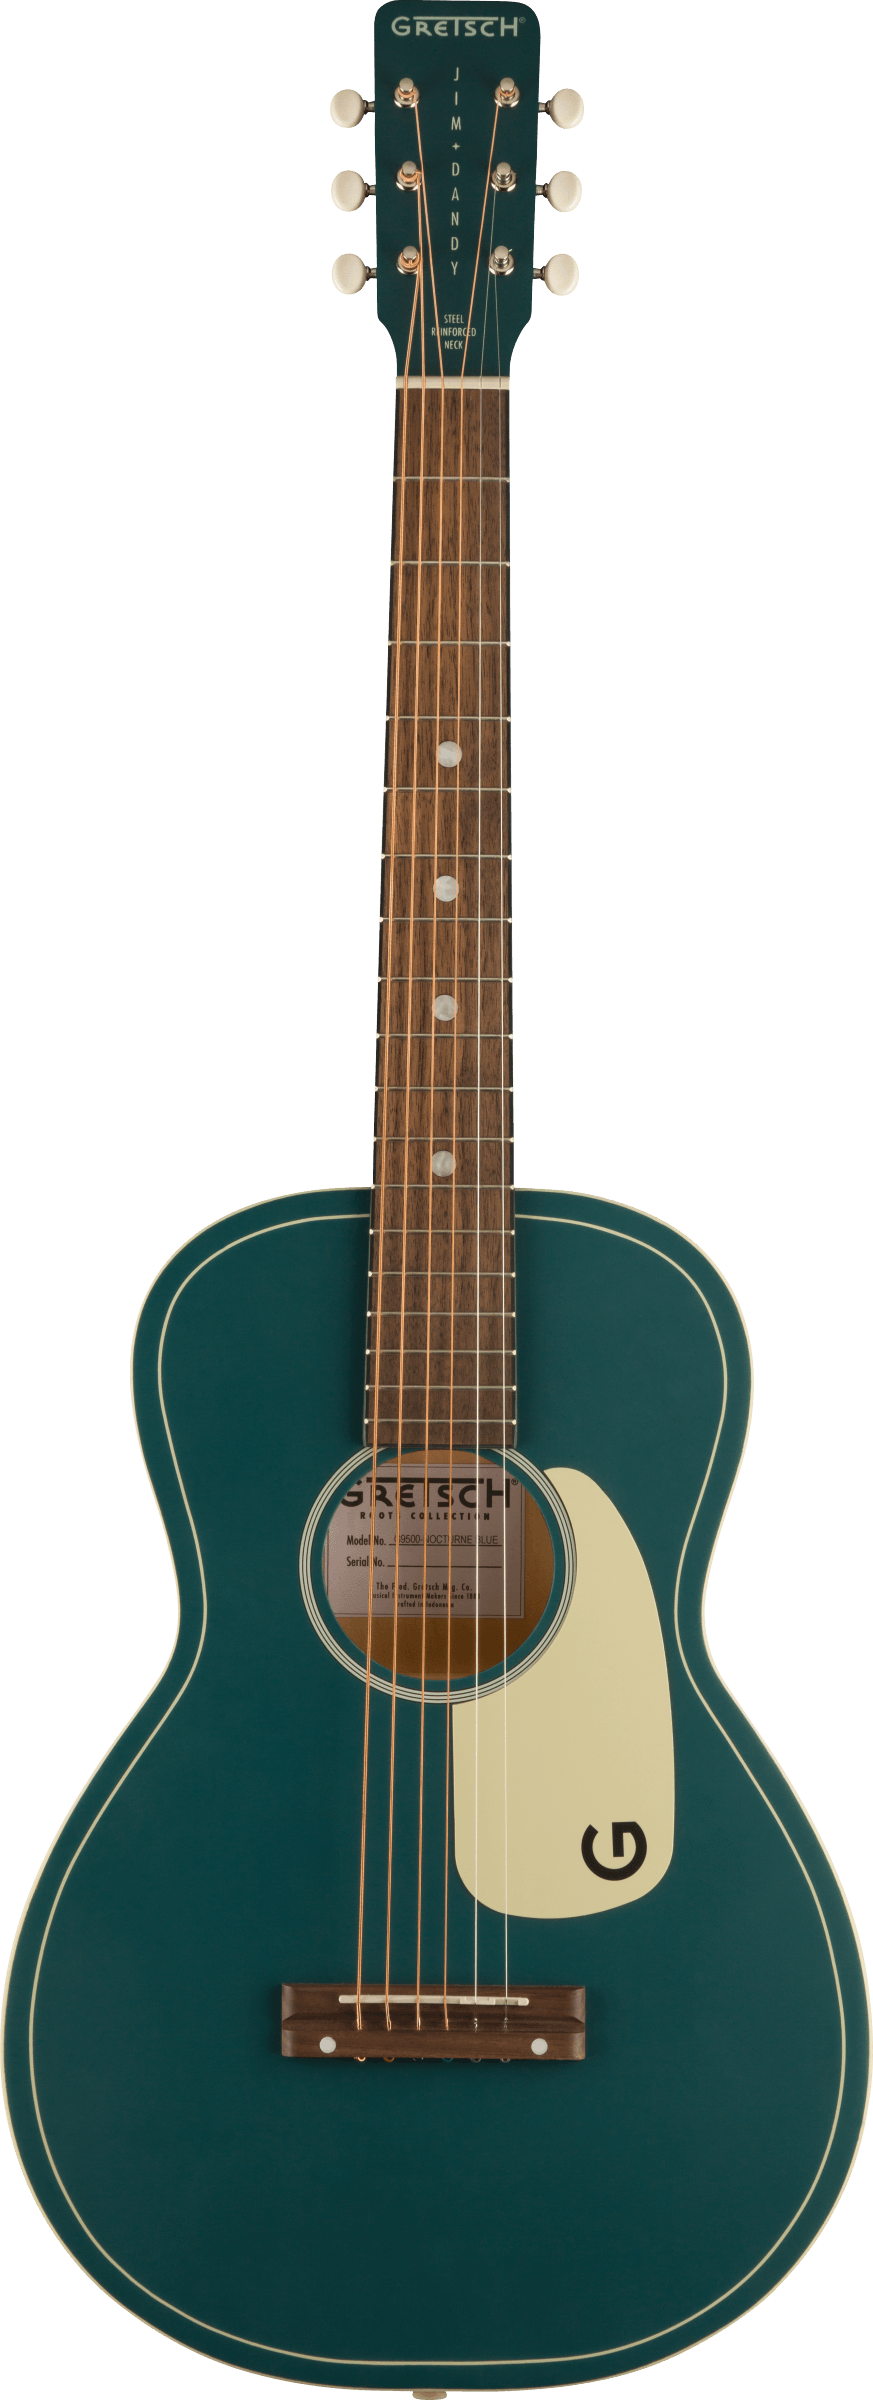 Gretsch G9500 Jim Dandy Limited Edition Acoustic Guitar in Nocturne Blue